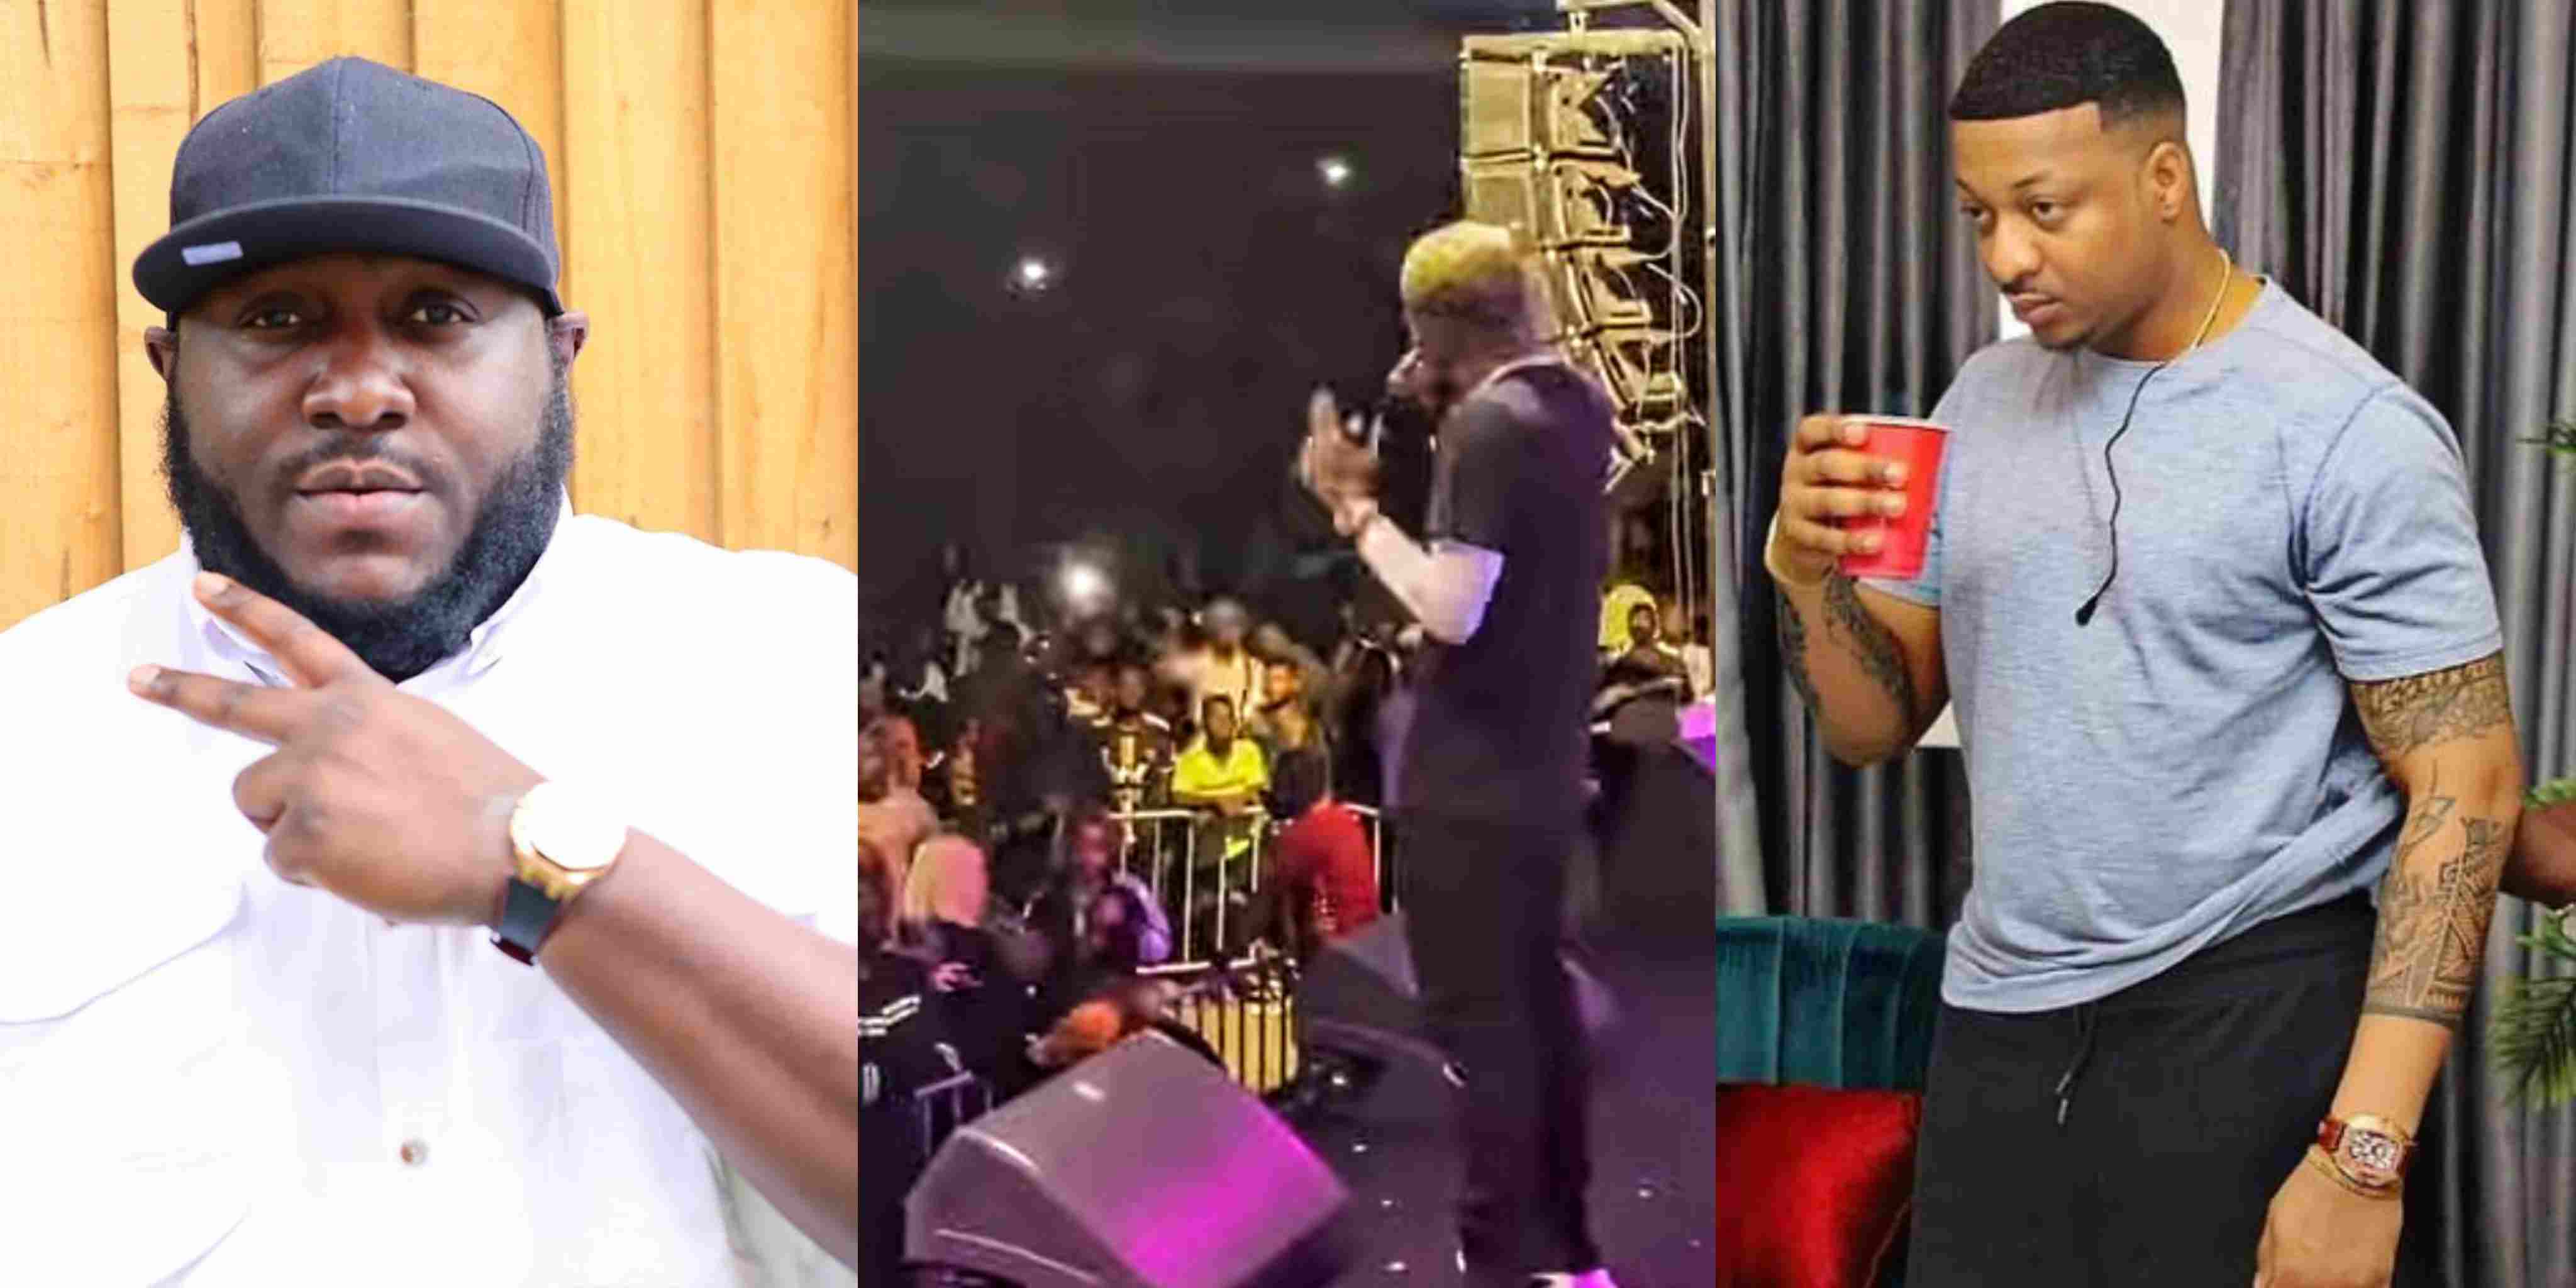 Ogbonna and DJ Big N drag Shatta Wale after he expressed contempt for Nigerian artistes Shortly after Ghanian musician, Shatta Wale threw shades at Nigerian artistes after he sold out the biggest stadium in Ghana, actor IK Ogbonna and DJ Big N reacts. The reaction from the two Nigerian artistes comes after the Ghanian artiste could be heard in a viral video saying, "They said I won't be able to fill my own stadiums, I don't need any Nigerian artiste to sell out Ghana's Stadium, F*** all Nigerian artistes" Reacting to the video on Instagram, IK Ogbonna wrote, "MR shattawalenima you are a total and complete disappointment. In a time where we should be growing together and helping each other through creative collaborations. "You should Appreciate the Nigerian artist coz a win for any Nigerian artist is a win for Africa. How do you promote unity with utterances like this. This is very weak from you ... deal with ur complex issues and grow up. "As an artist I have featured in a few ghana movies and I have also worked with amazing, adorable Ghanaians here in Nigeria .... You should totally apologize for this #hatespeech." On the orther hand, DJ Big N said, My Dear @shattawalenima, Iwatched this video more than once. I tried to see your point. We are not the enemy. You can't Blaitanlty say "FxxK Nigerians" and think there won't be any repercussions. "We are not to blame that you are a local champion. Look at your counterpart @stonebwoyb He works smart. Stop this bickering and talk true. Naija man don collect your babe again Abi."